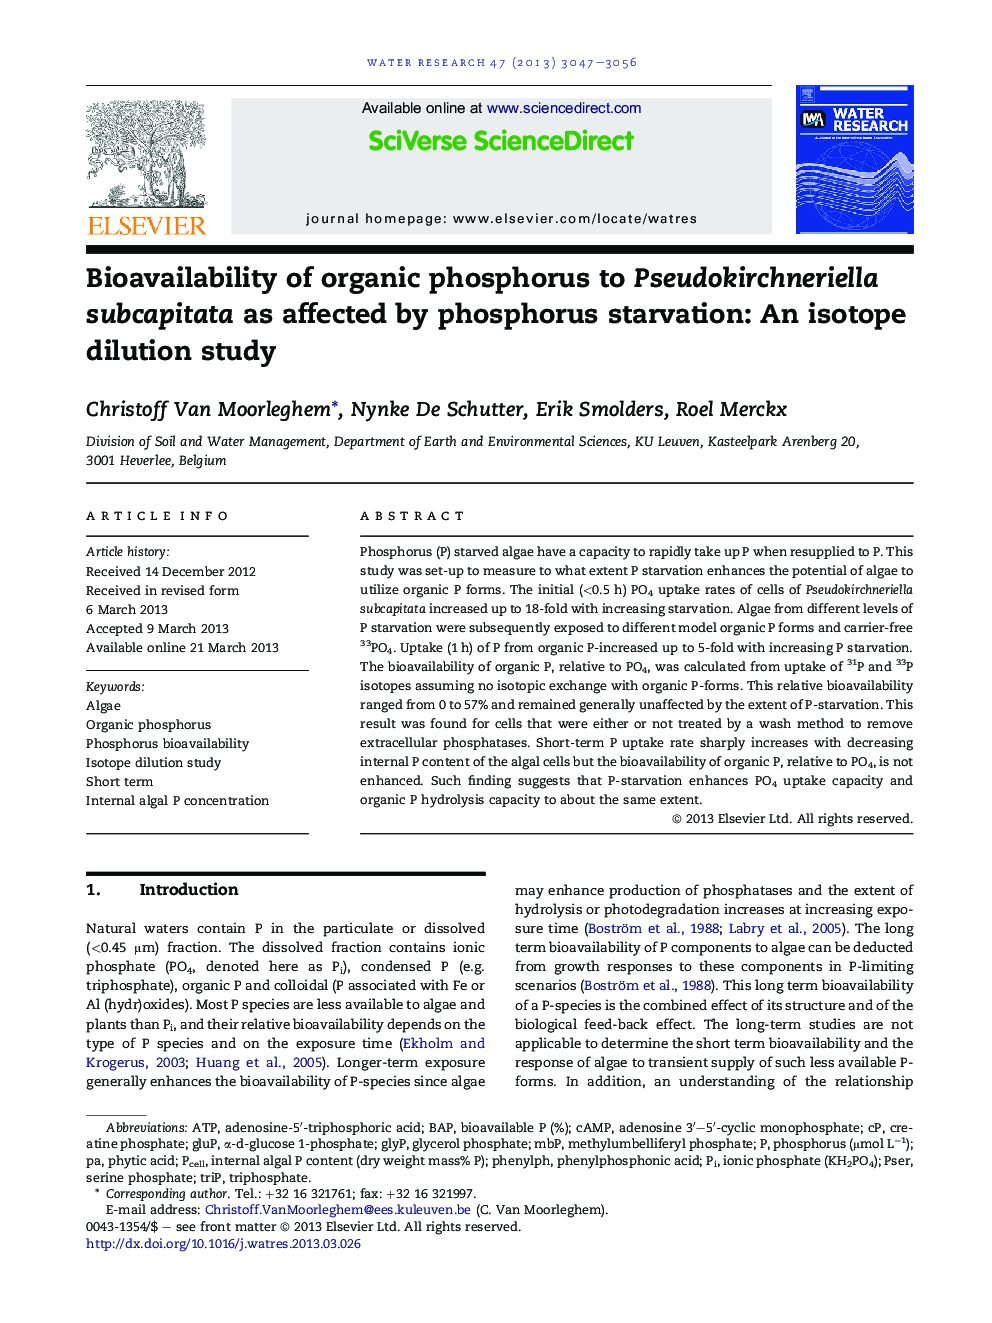 Bioavailability of organic phosphorus to Pseudokirchneriella subcapitata as affected by phosphorus starvation: An isotope dilution study